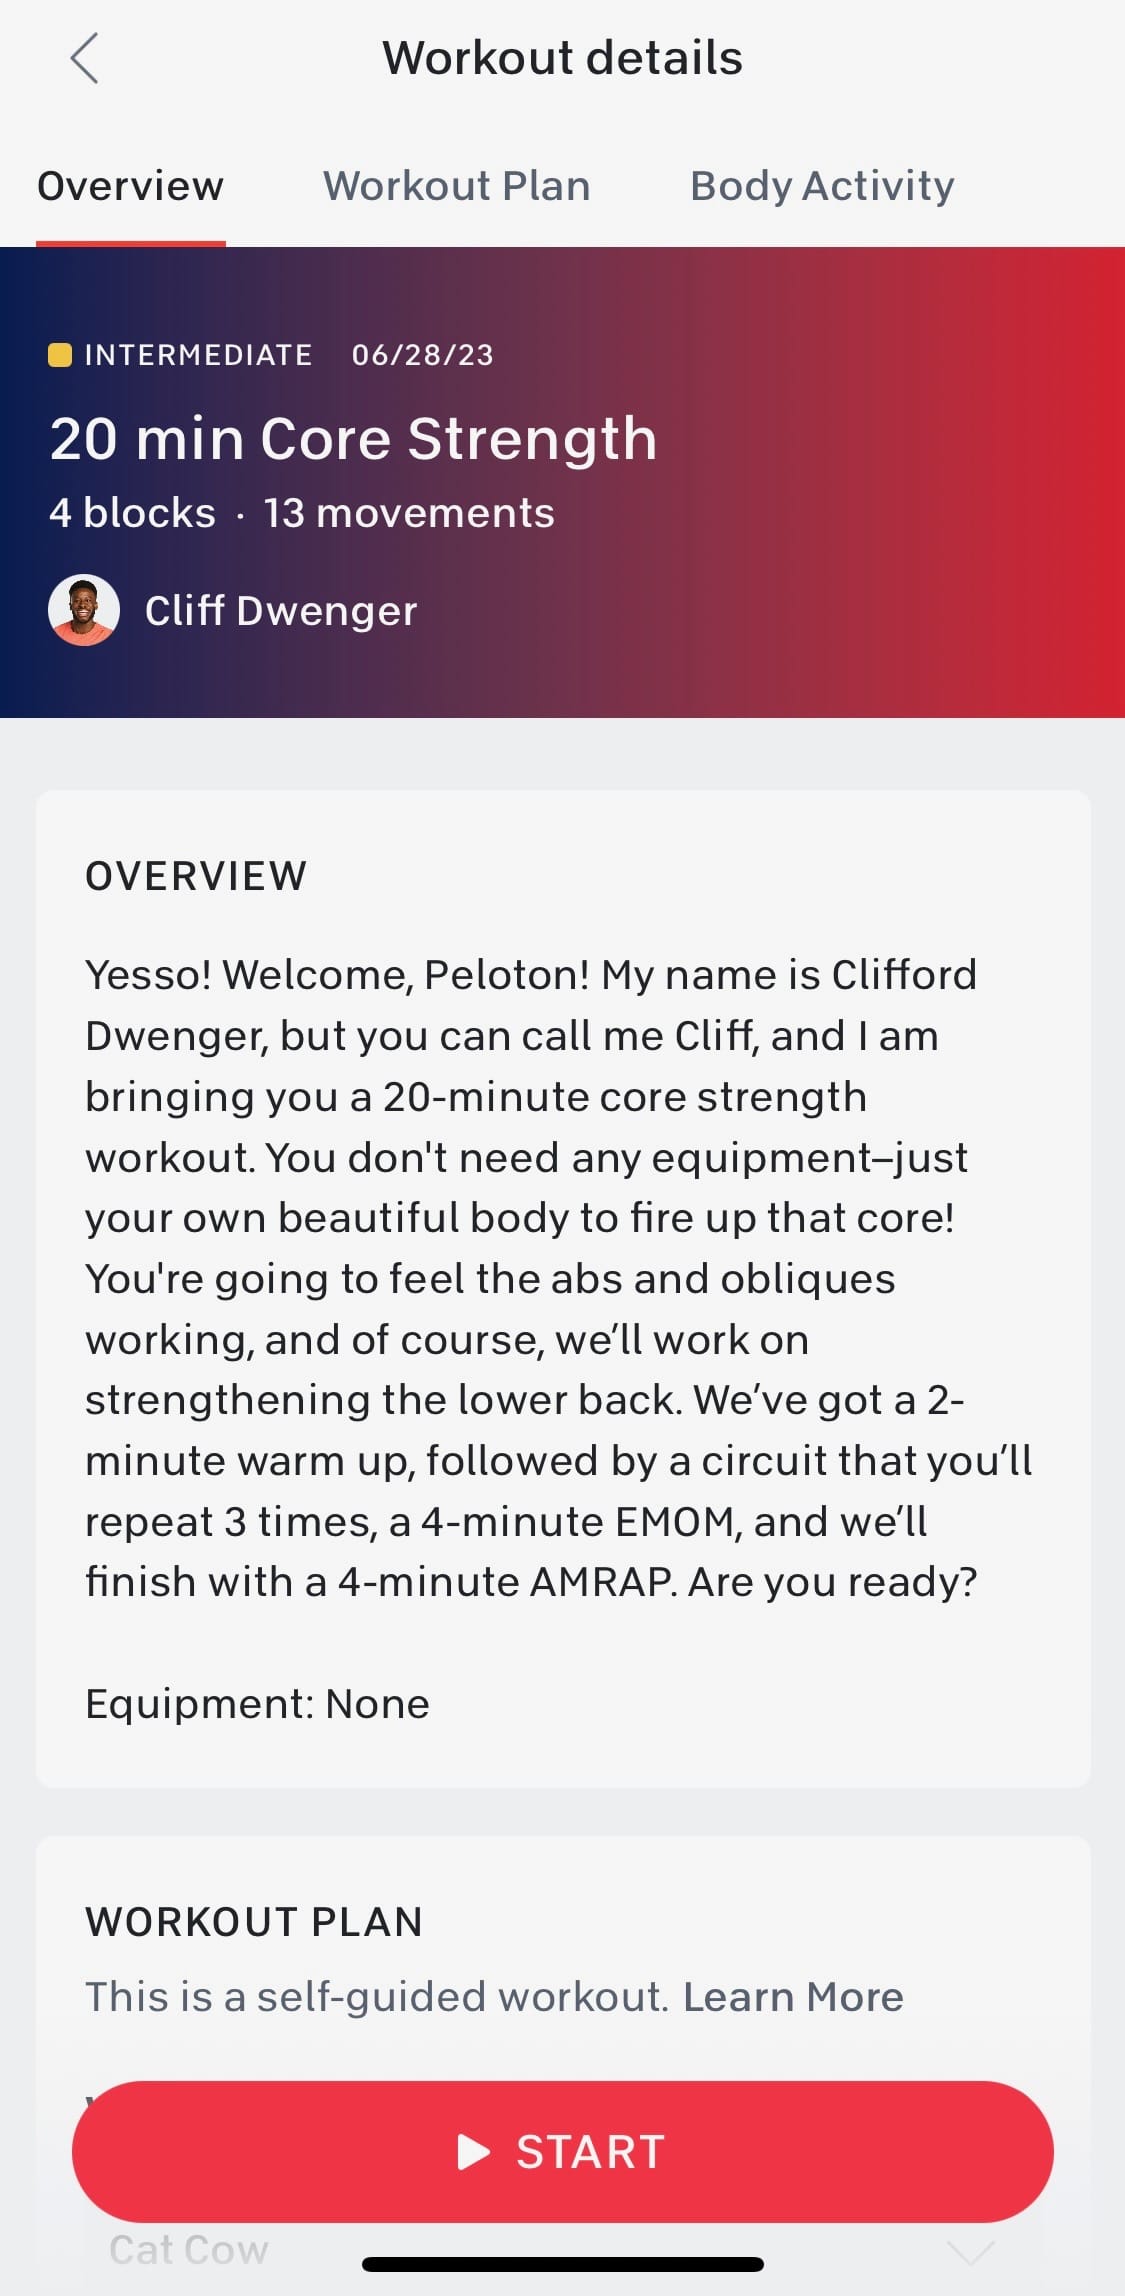 Peloton Gym self-guided workout with Cliff Dwenger.